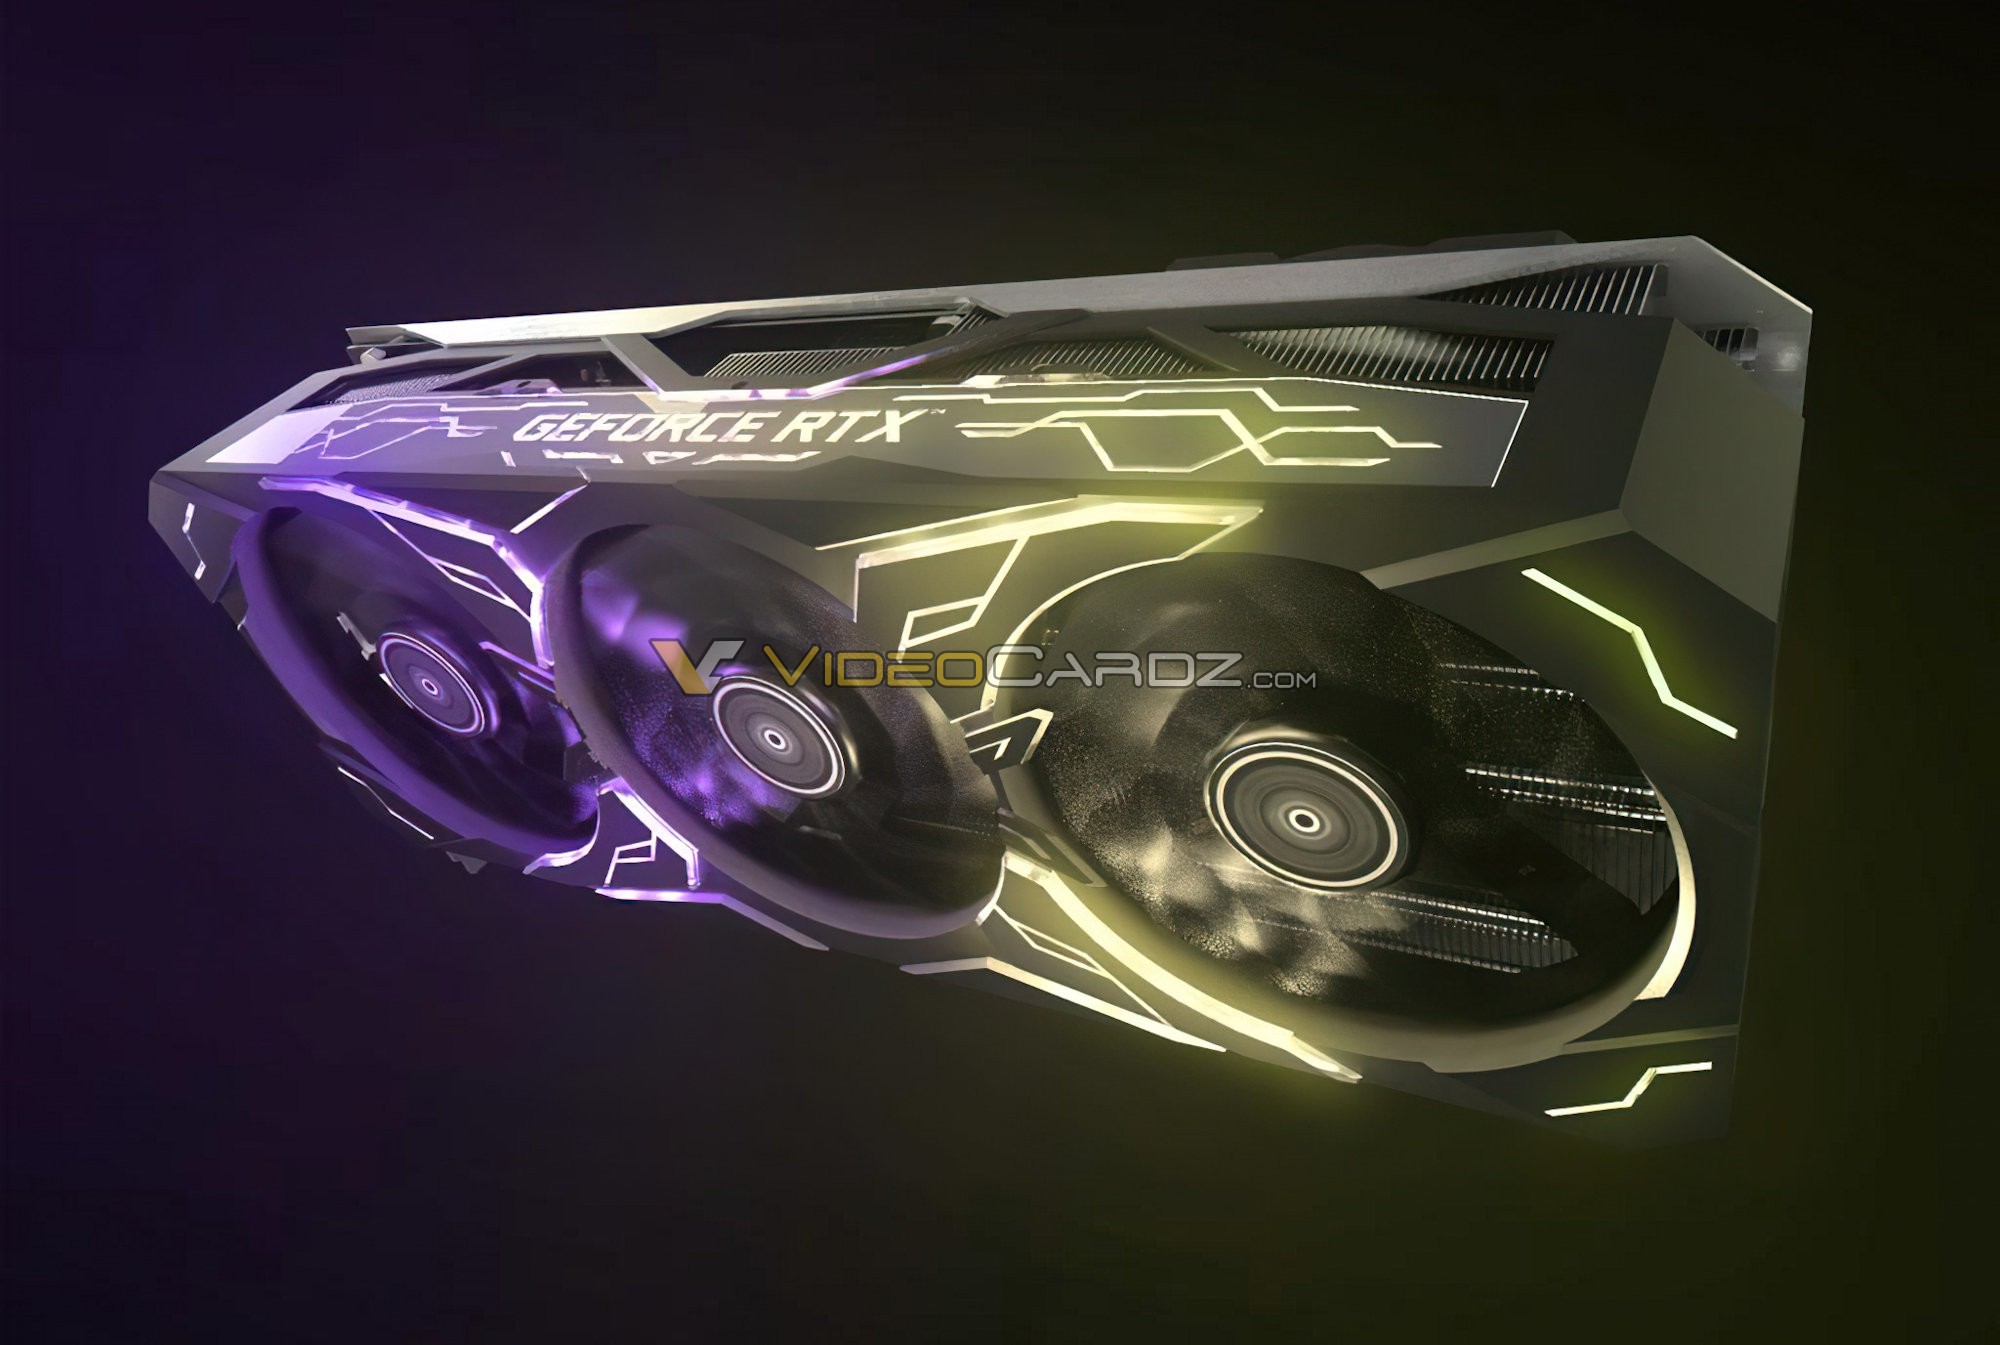 GALAX new 'Serious Gaming' graphics card with four has leaked - VideoCardz.com